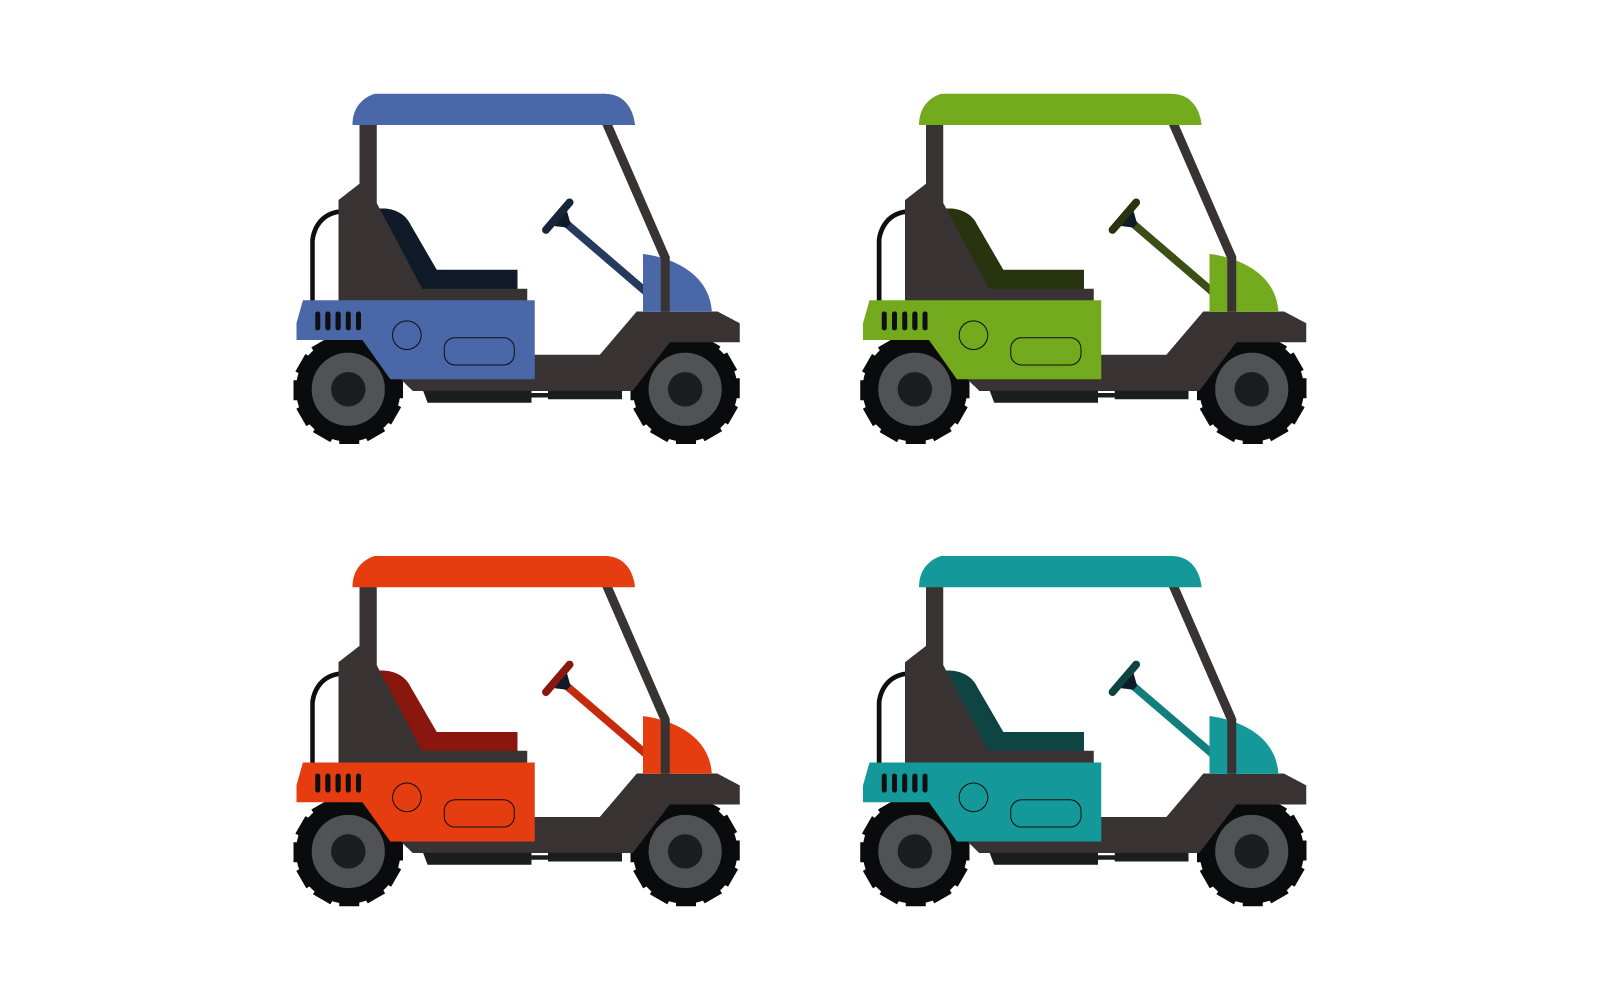 Golf car illustrated in vector on background